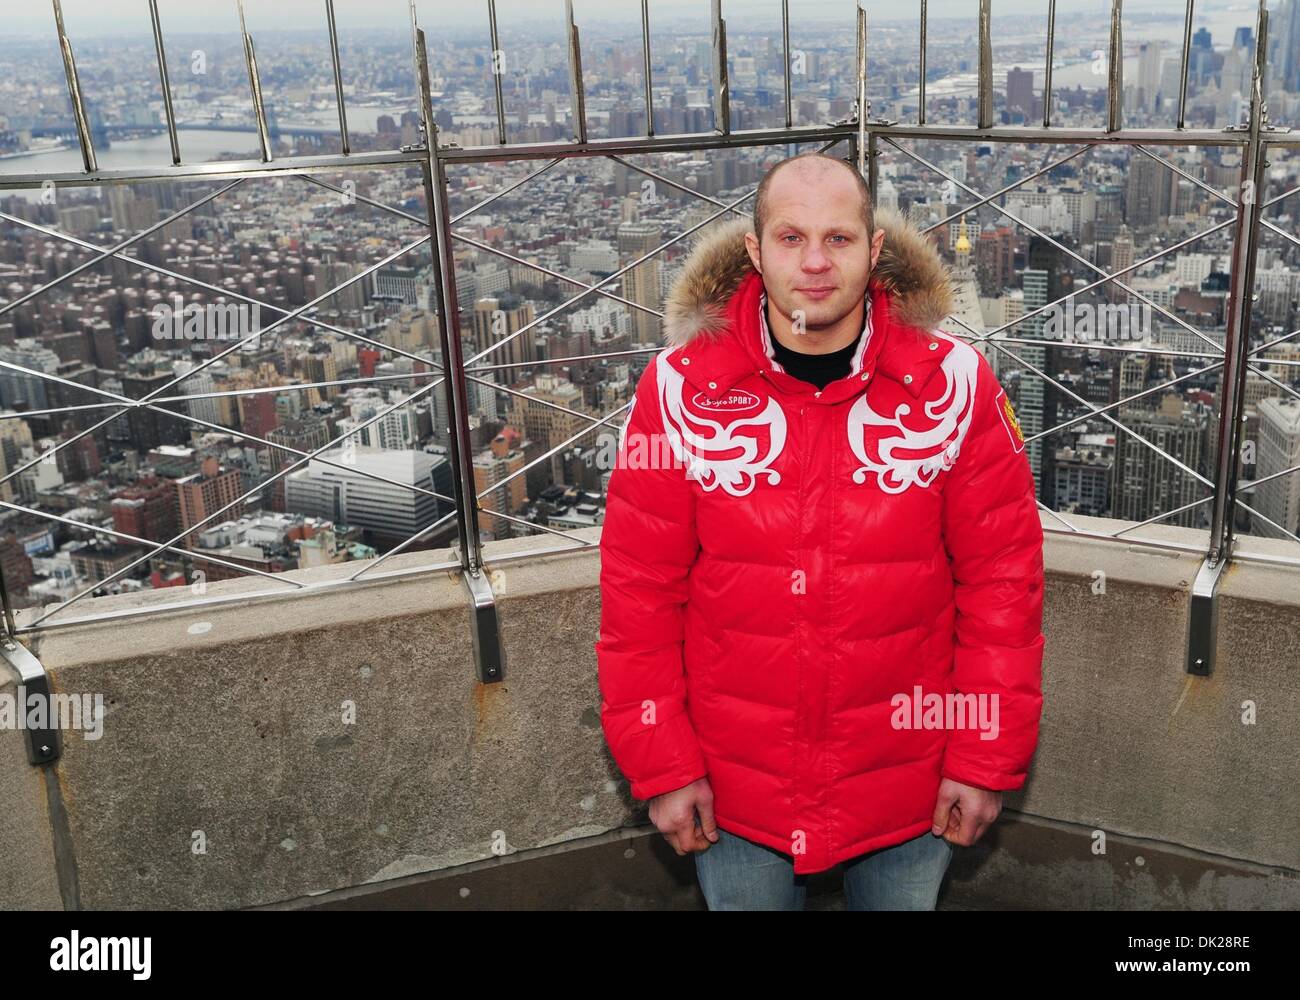 Feb. 9, 2011 - Manhattan, New York, U.S. - Strikeforce Mixed Martial Arts fighter FEDOR EMELIANENKO, also known as The Last Emperor, visits the Empire State Building's 86th floor observatory ahead of this Saturday's Strikeforce World Grand Prix at the Izod Center. (Credit Image: © Bryan Smith/ZUMAPRESS.com) Stock Photo